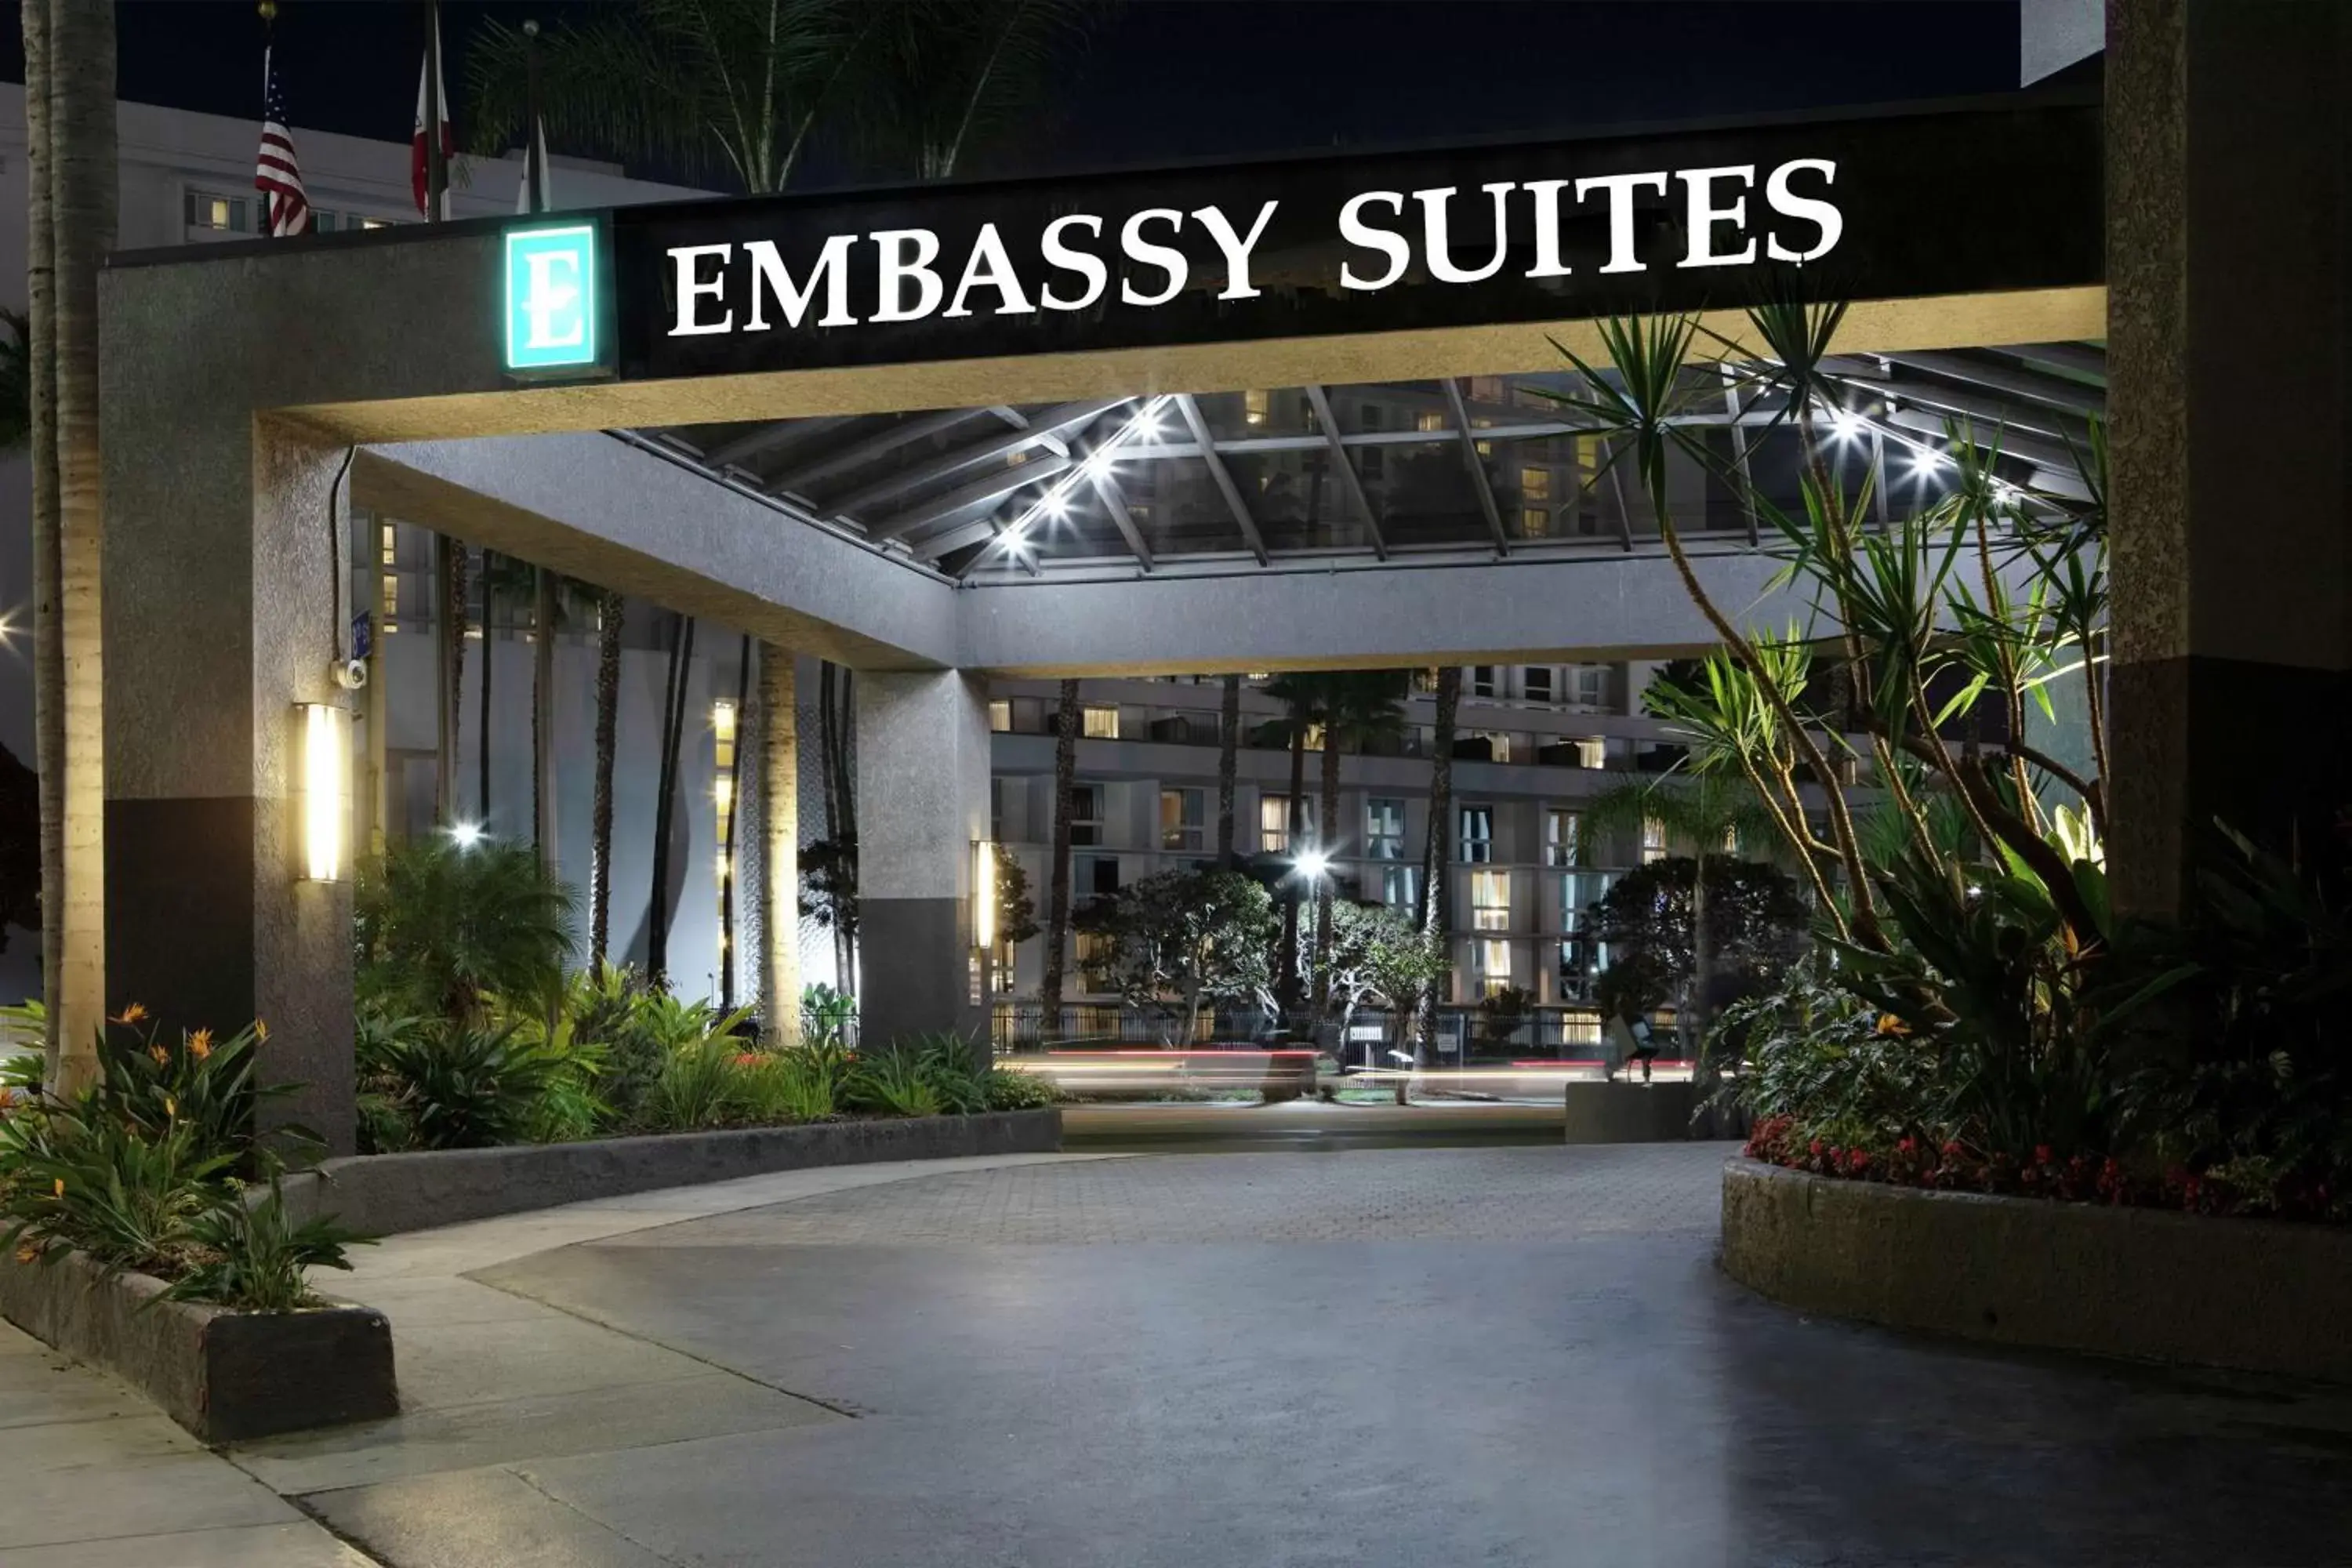 Property building in Embassy Suites Los Angeles - International Airport/North